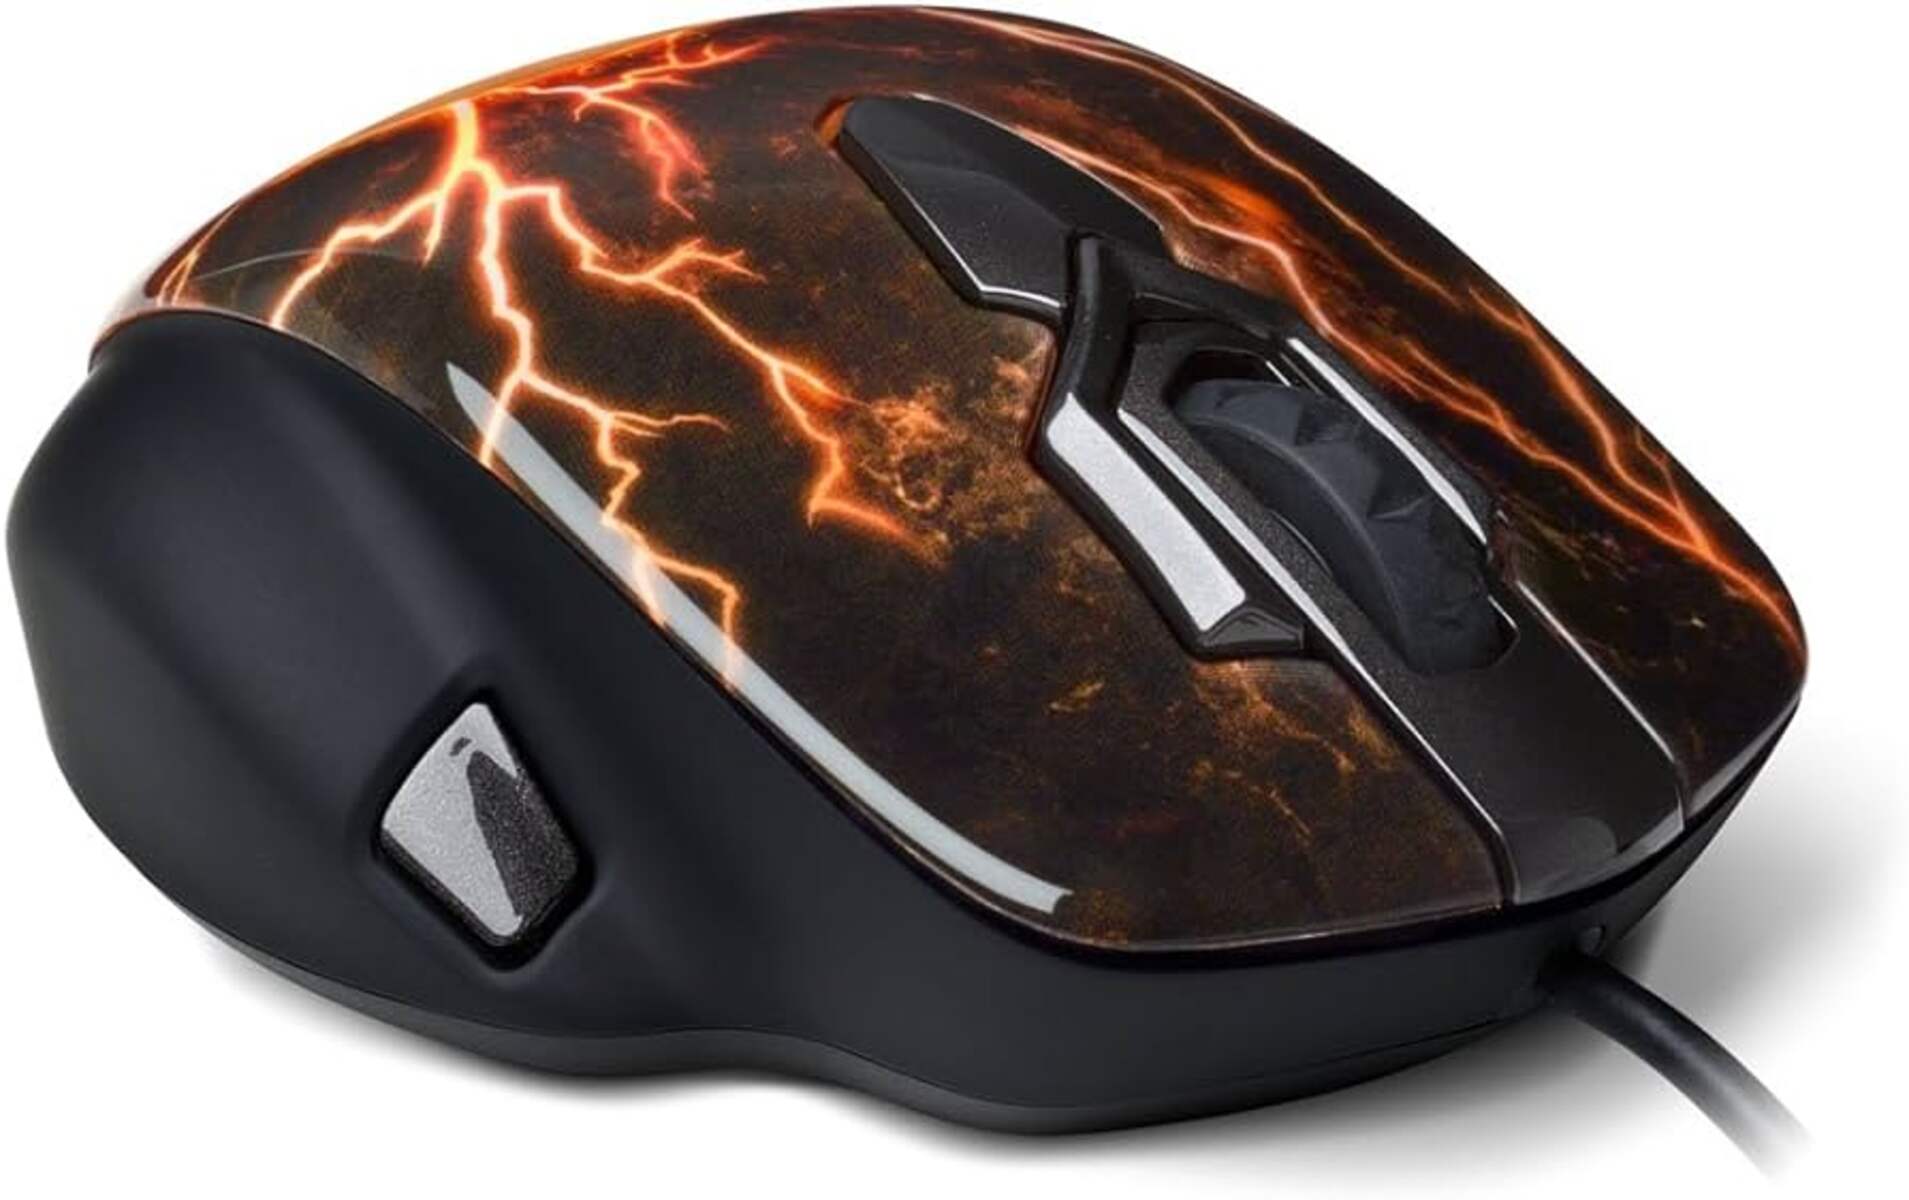 What SteelSeries Engine Is For Legendary WoW Gaming Mouse?